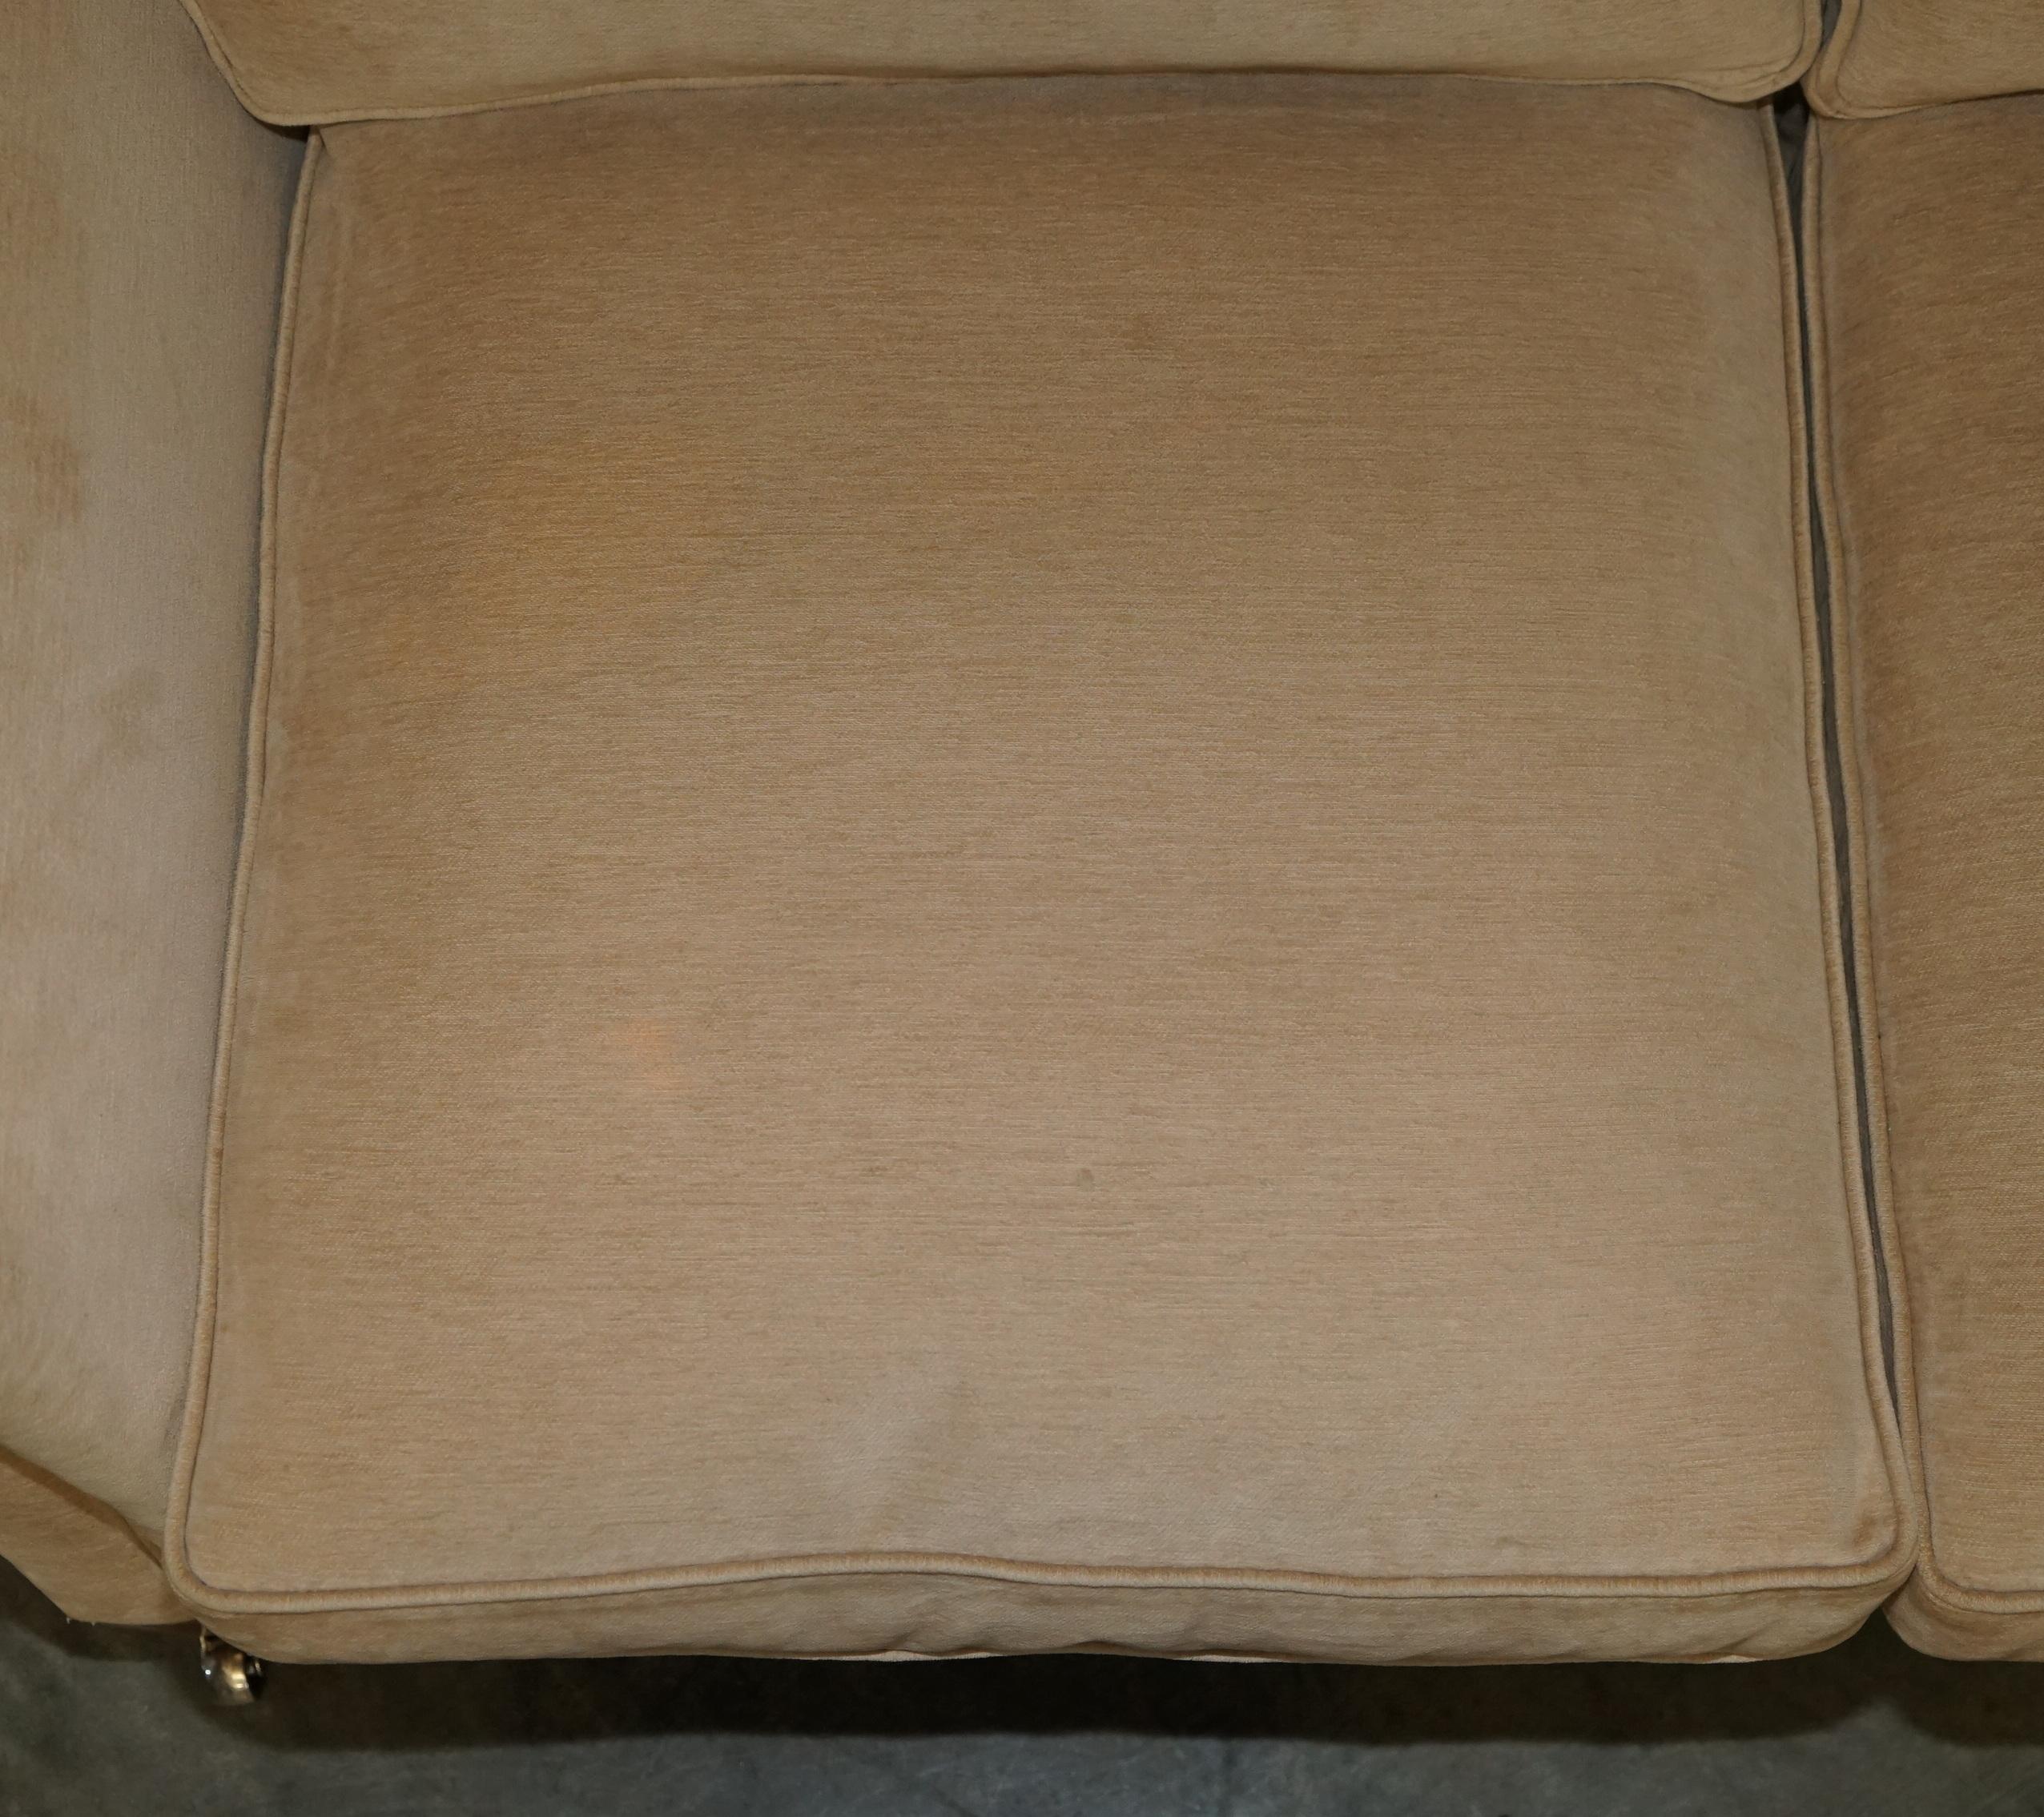 EXQUISITE VISCOUNT DAVID LINLEY TWO SEAT SOFA WiTH STAMPED CASTORS For Sale 1